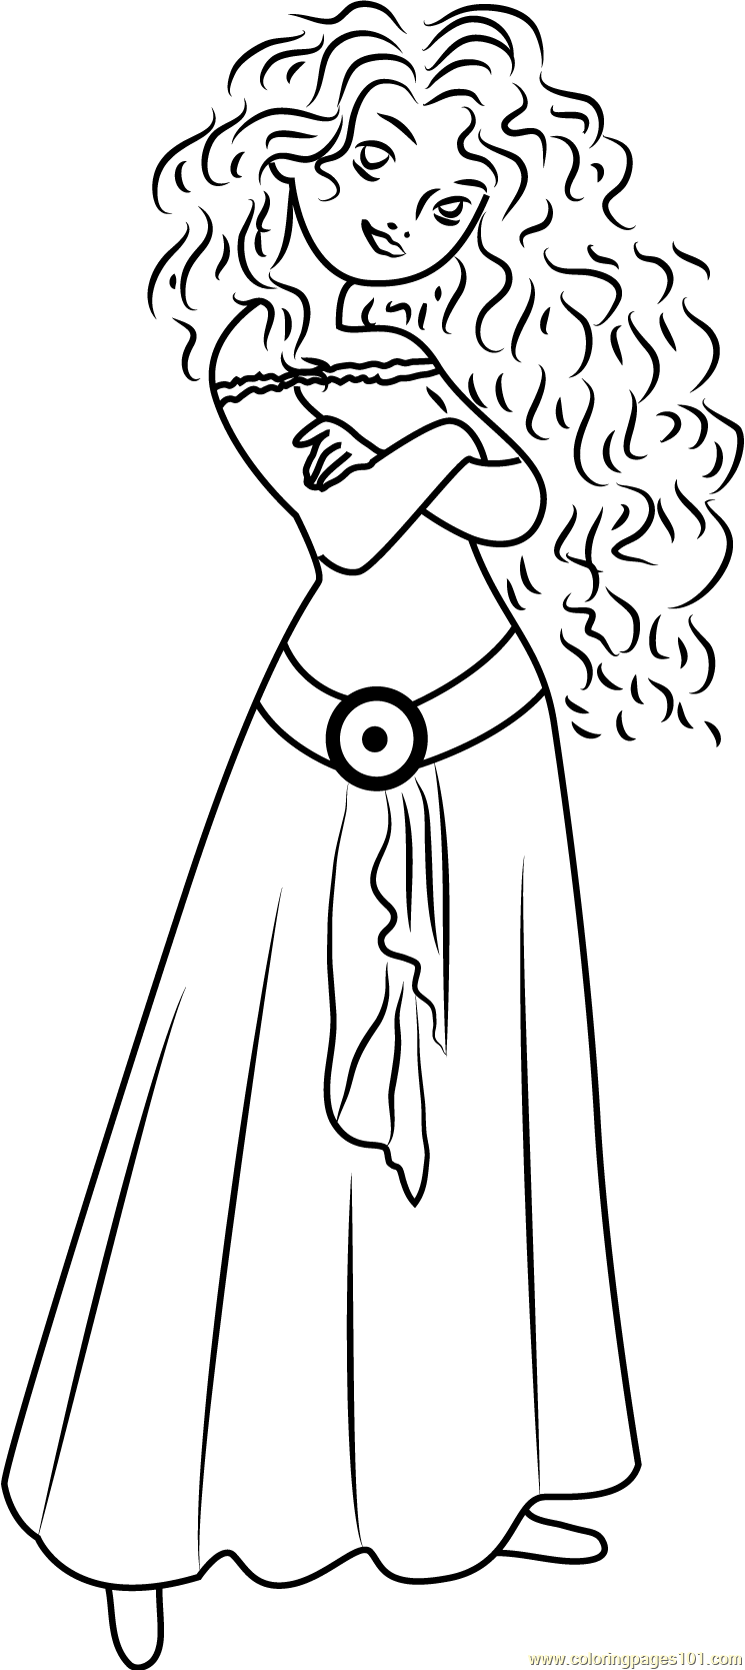 Cute Merida Coloring Page for Kids - Free Brave Printable Coloring ...